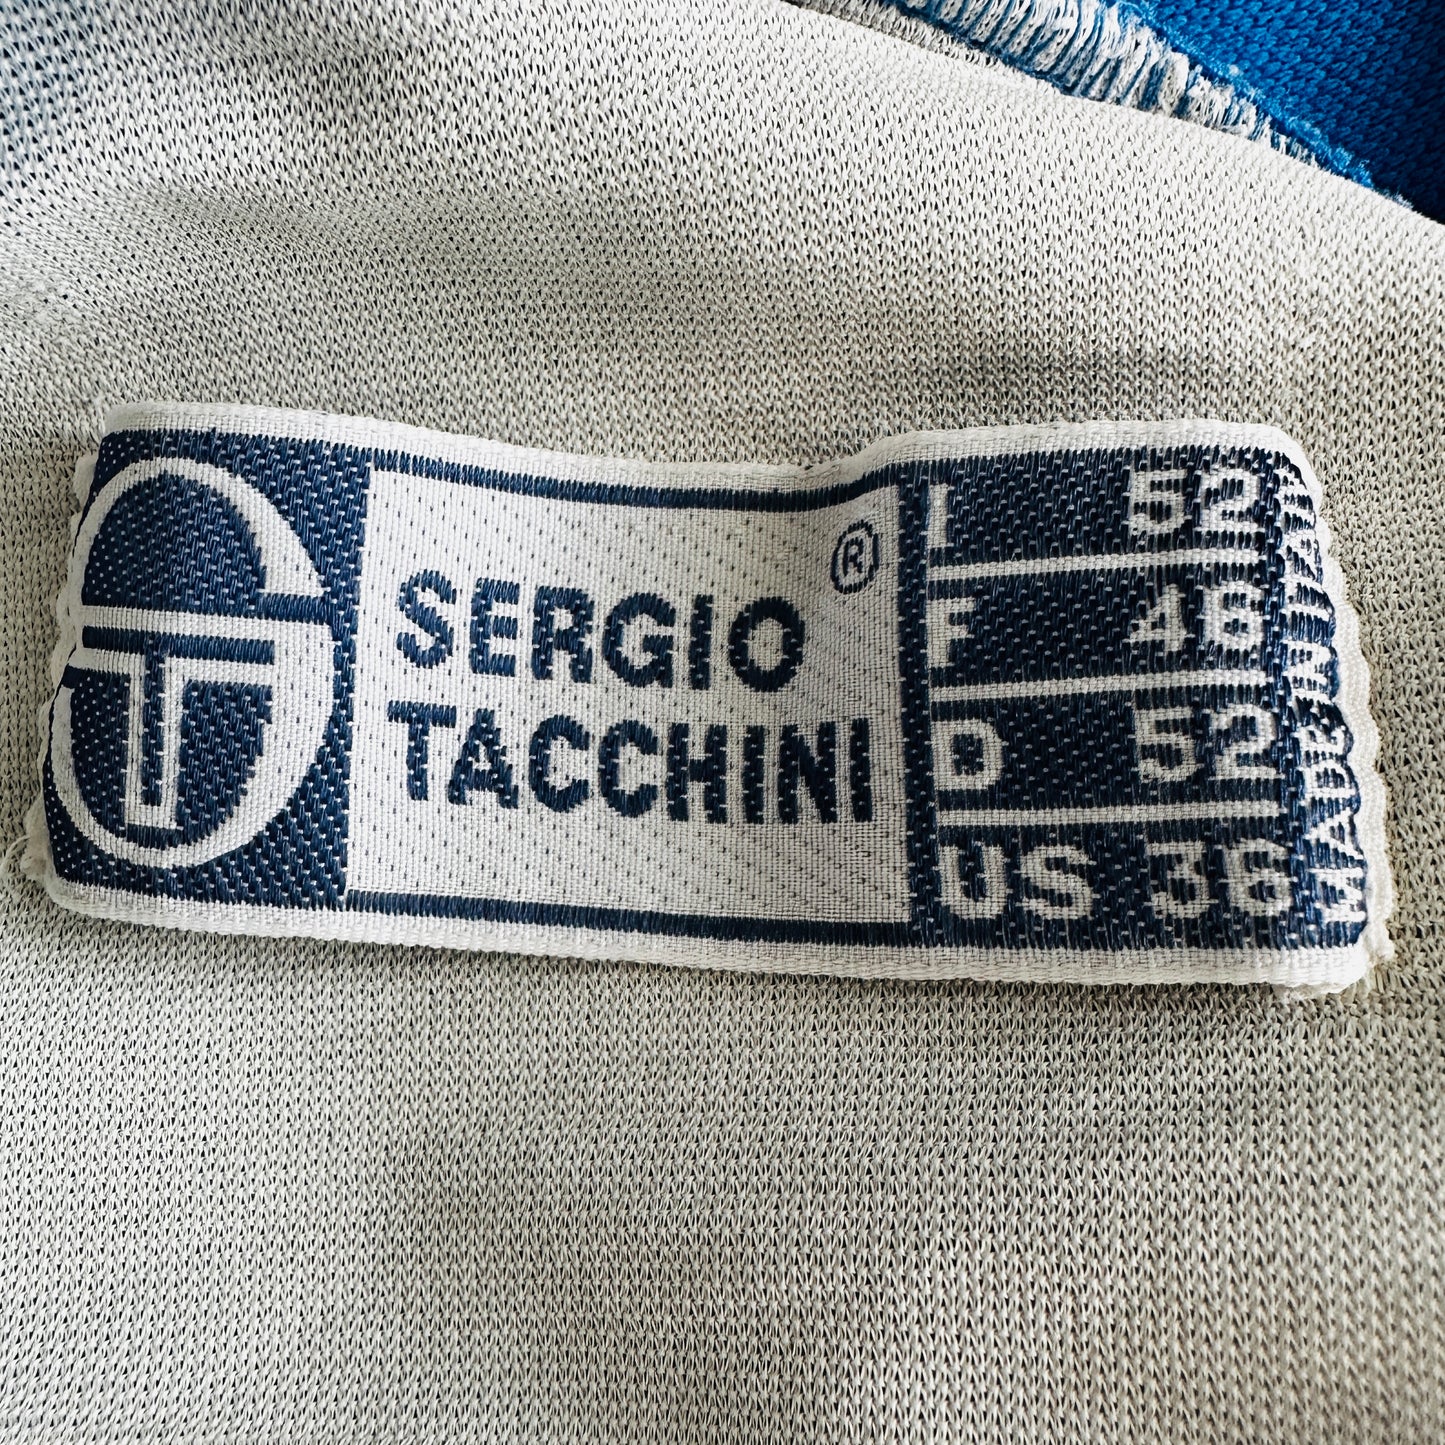 Sergio Tacchini 80s Tennis Shorts - 52 / XL - Made in Italy